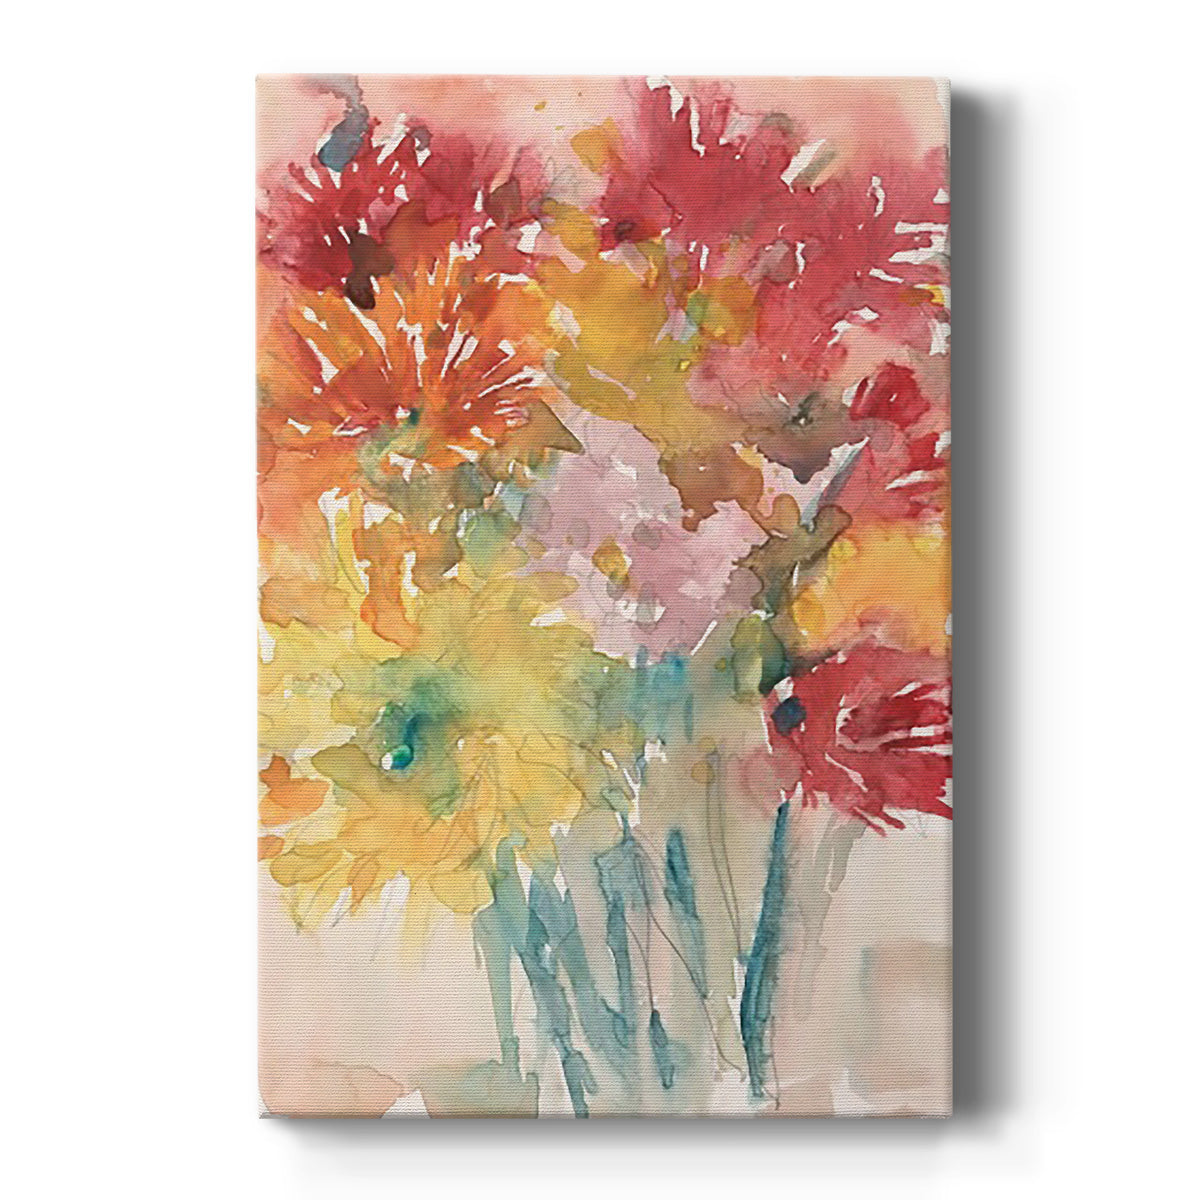 Floral Treats I Premium Gallery Wrapped Canvas - Ready to Hang